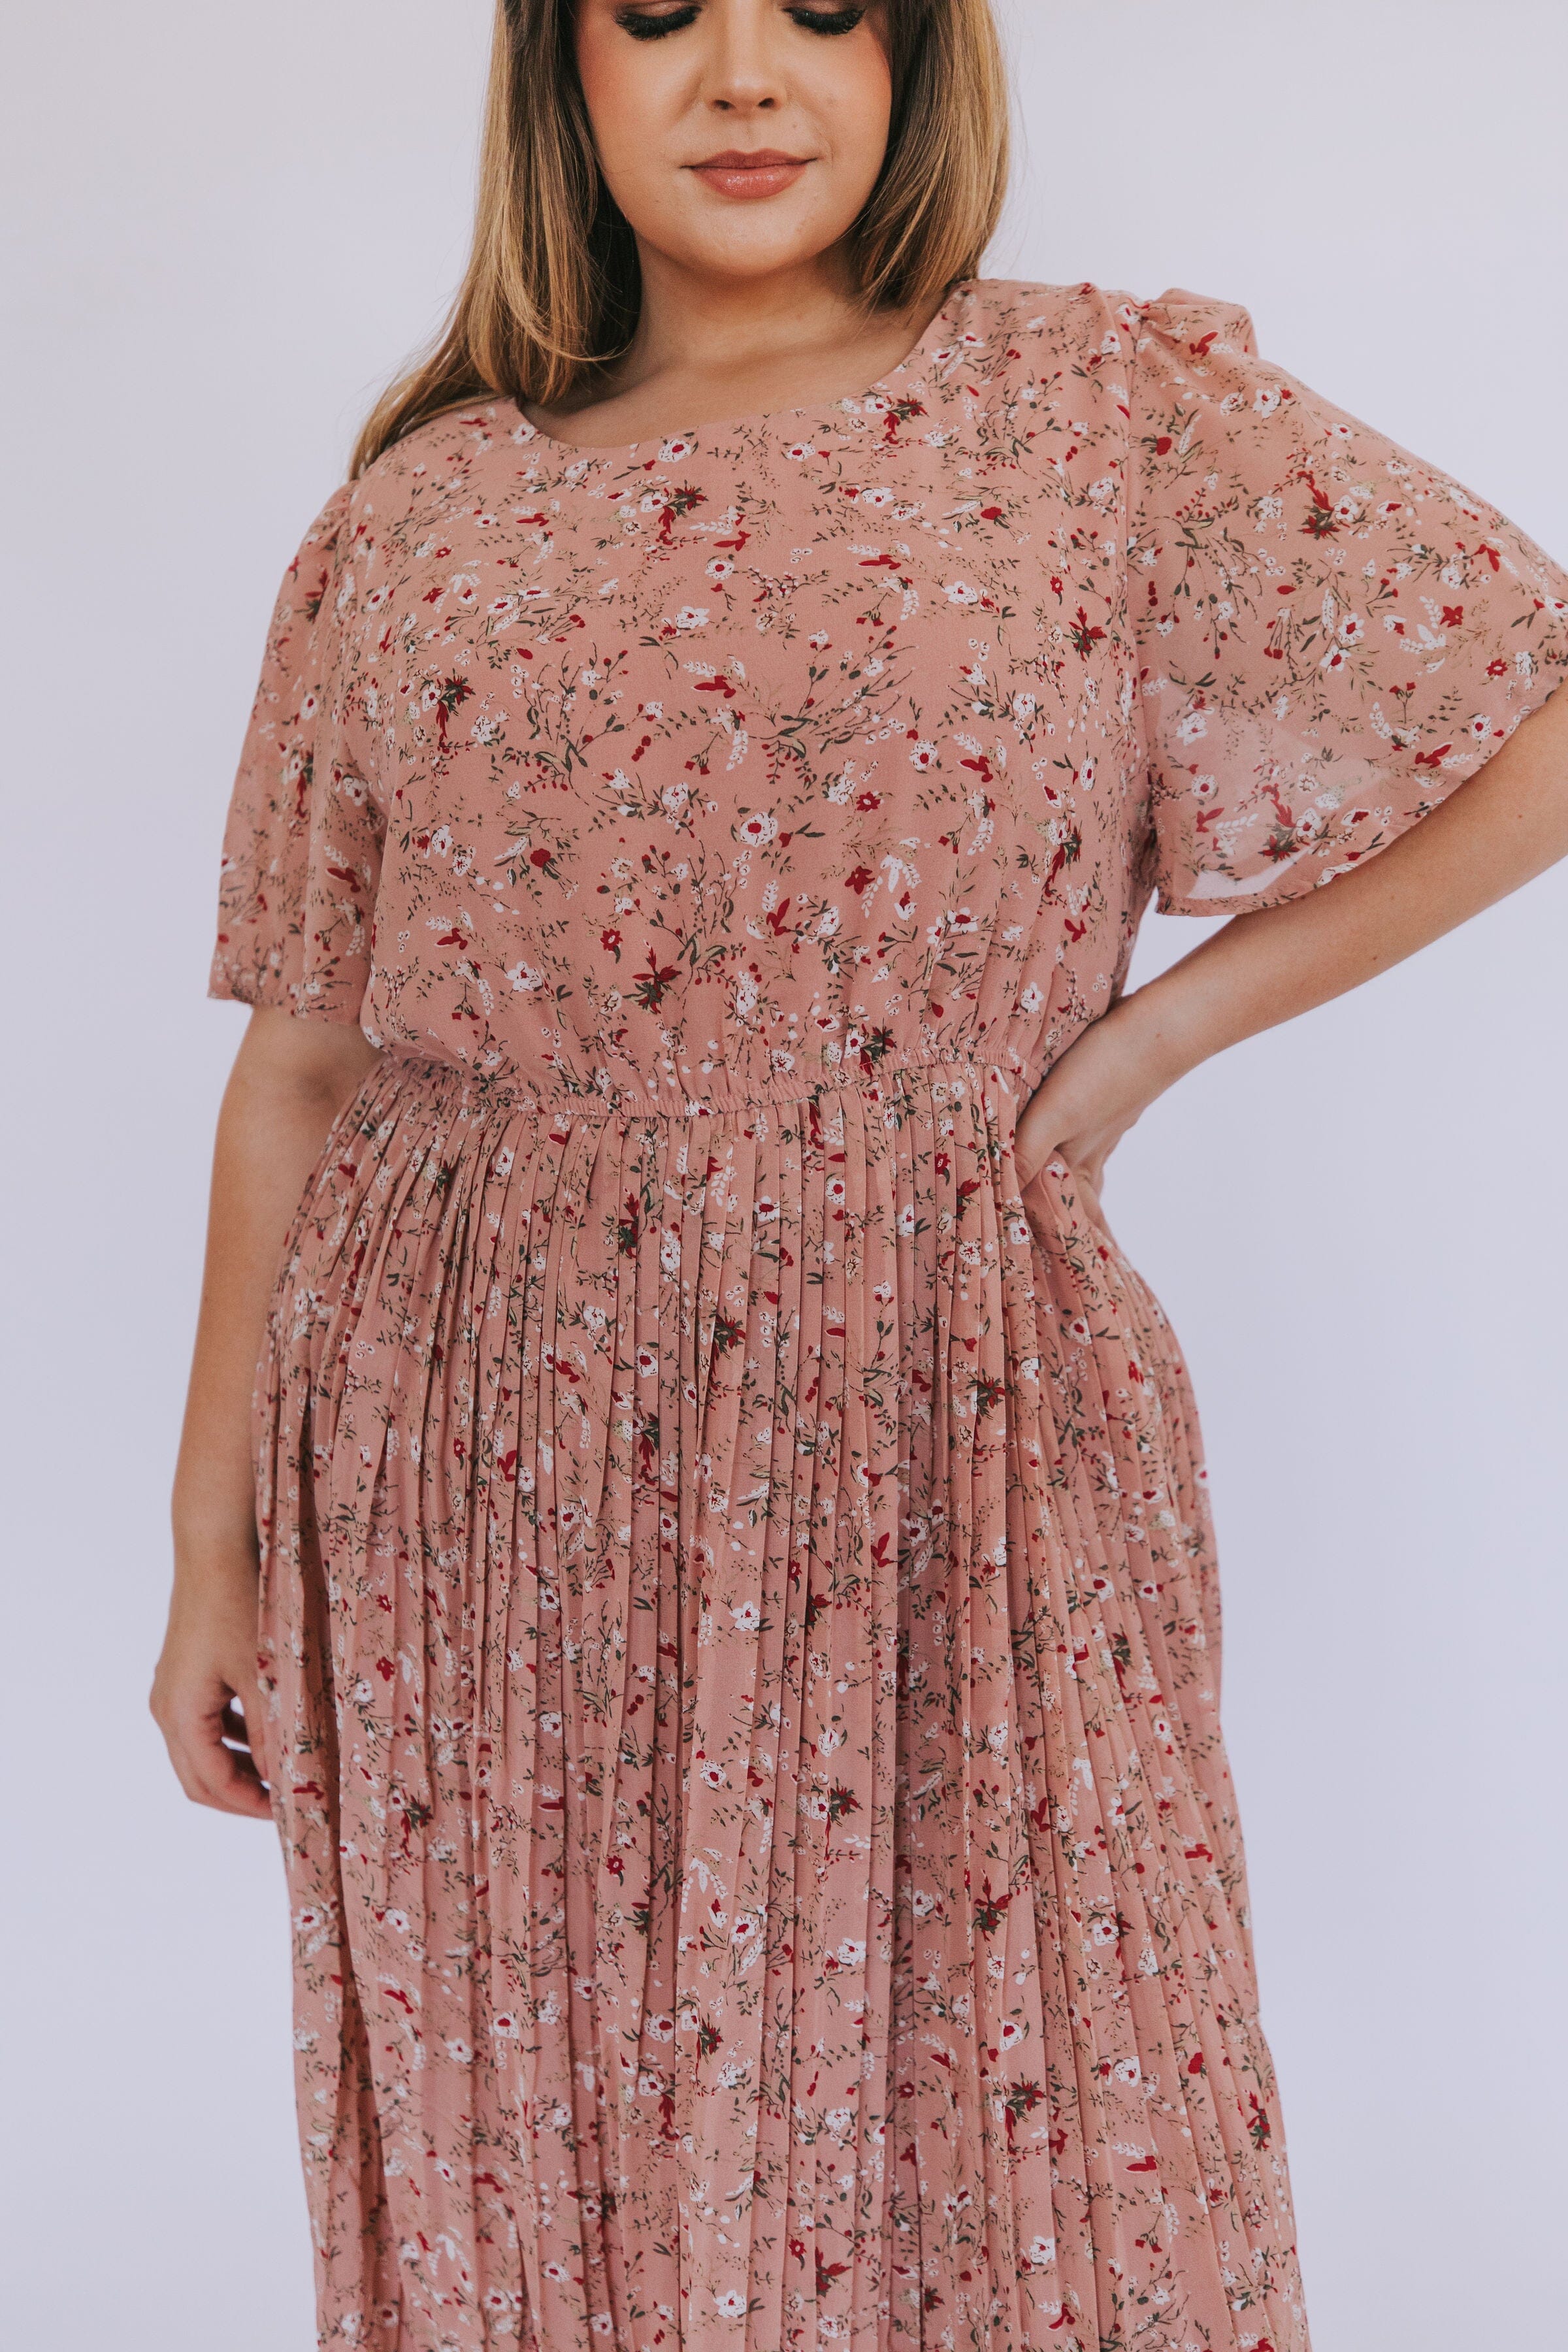 PLUS SIZE - Unapologetically Dress - 2 Colors!